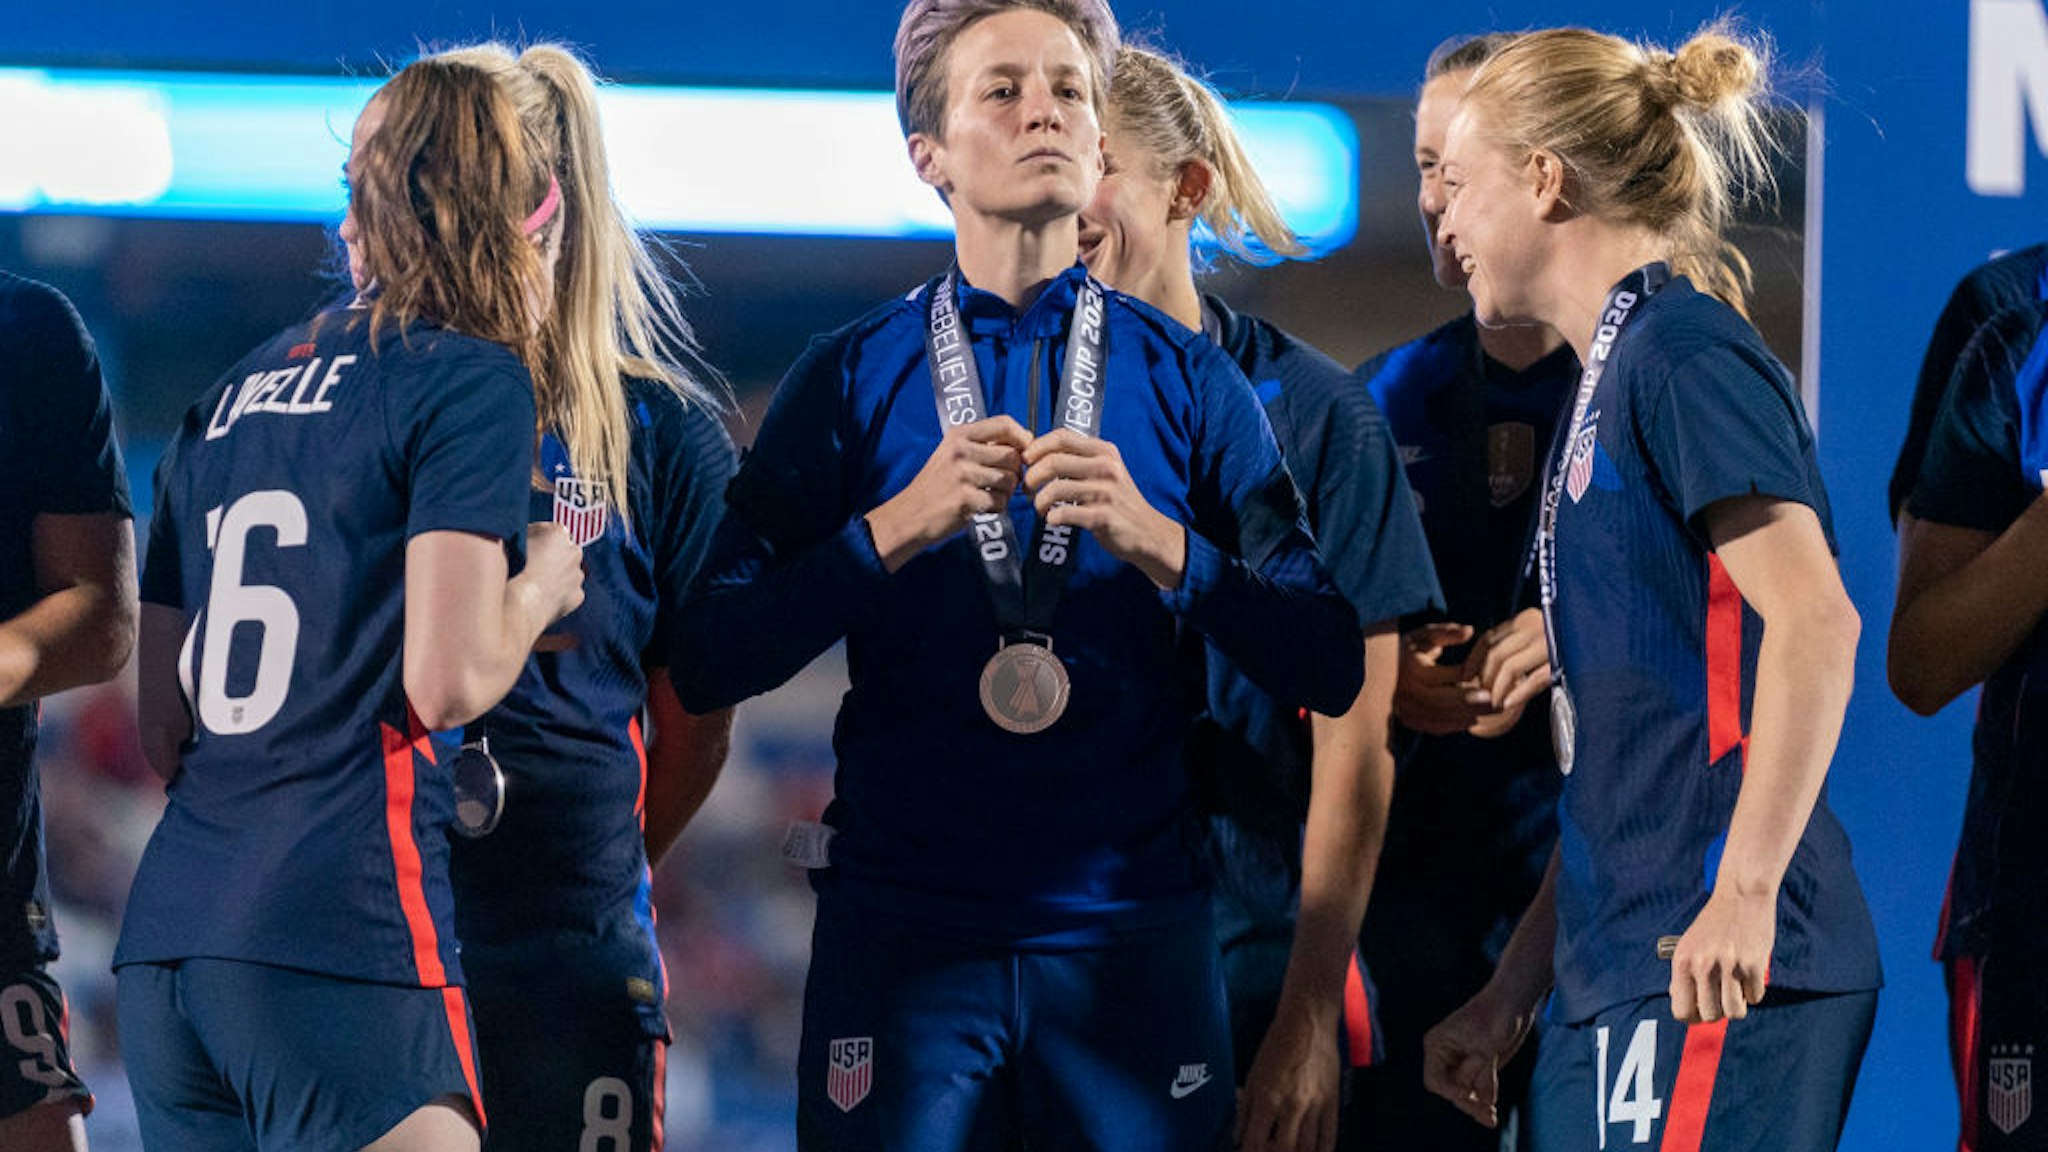 Megan Rapinoe #14 of the United States celebrates during a game between Japan and USWNT at Toyota Stadium on March 11, 2020 in Frisco, Texas.